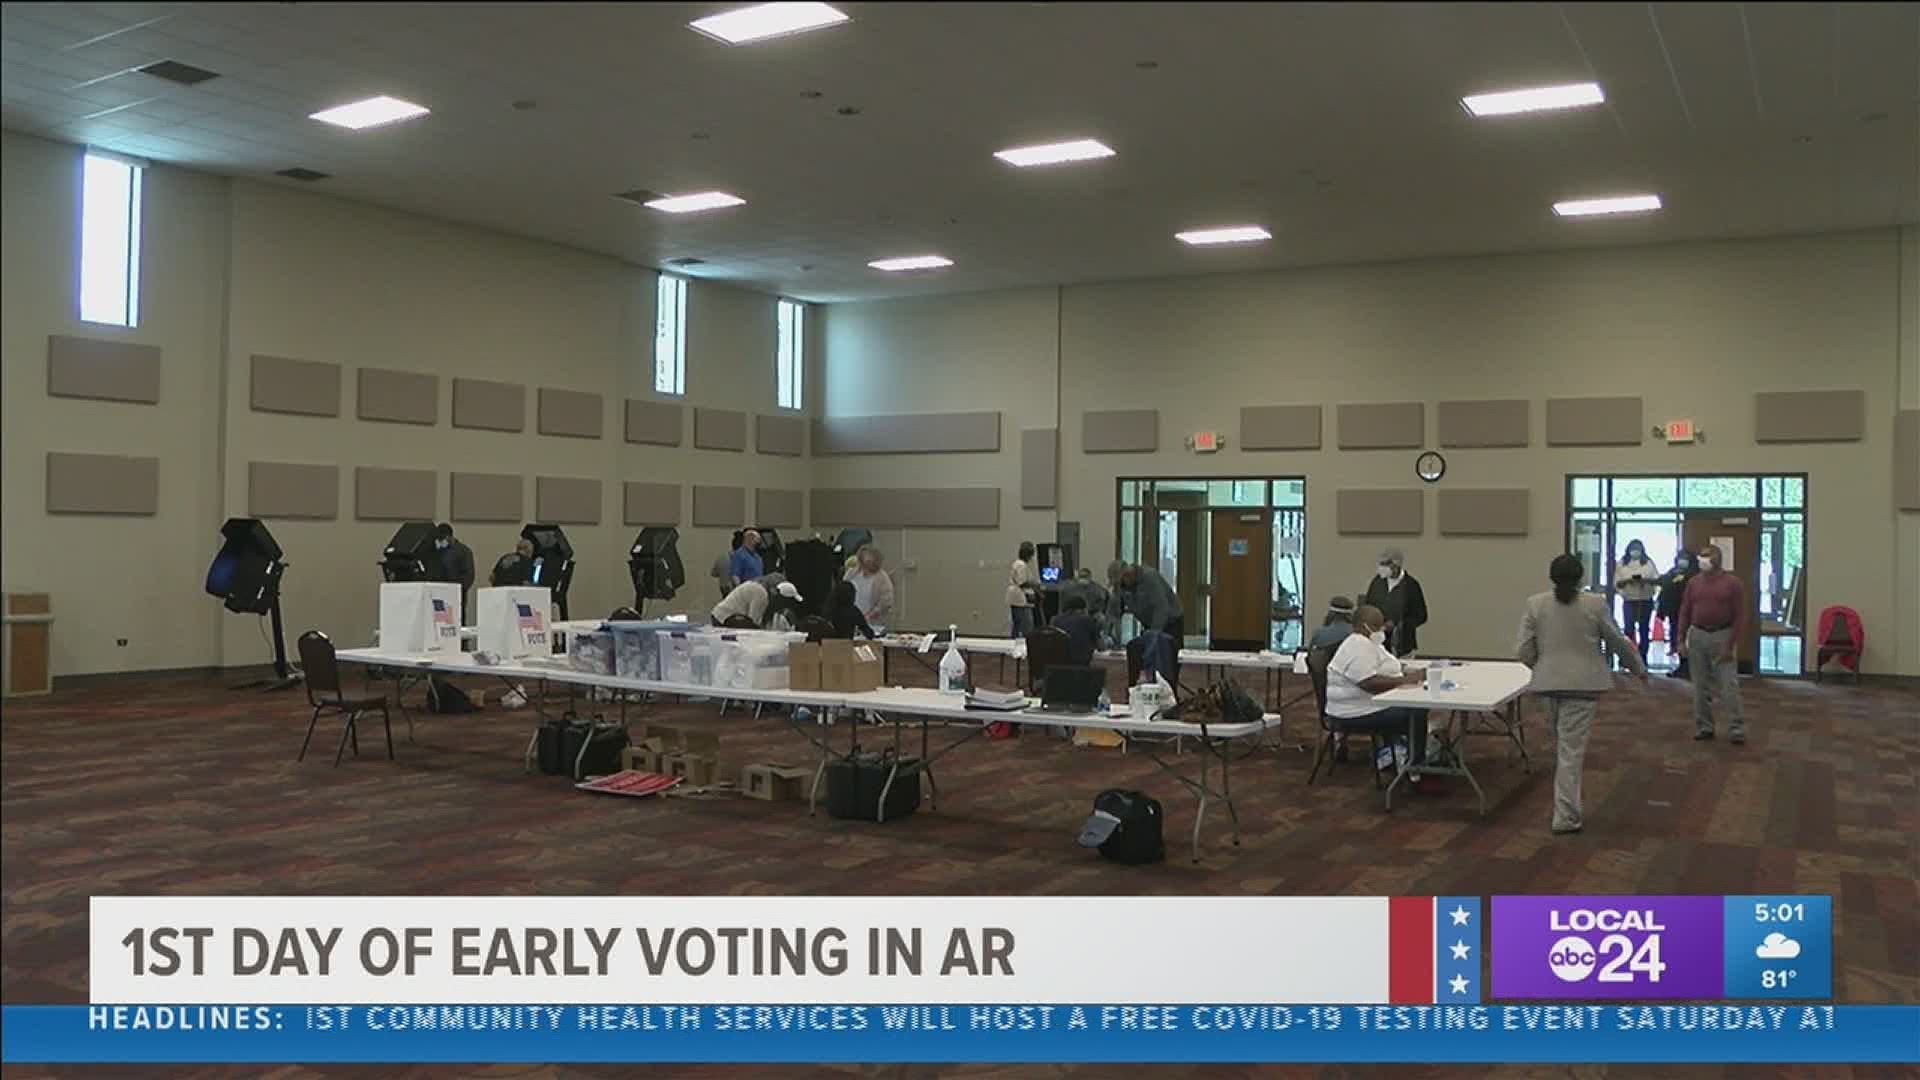 Crittenden County election organizers added second voting site for potential surge in turnout, COVID-19 precautions.